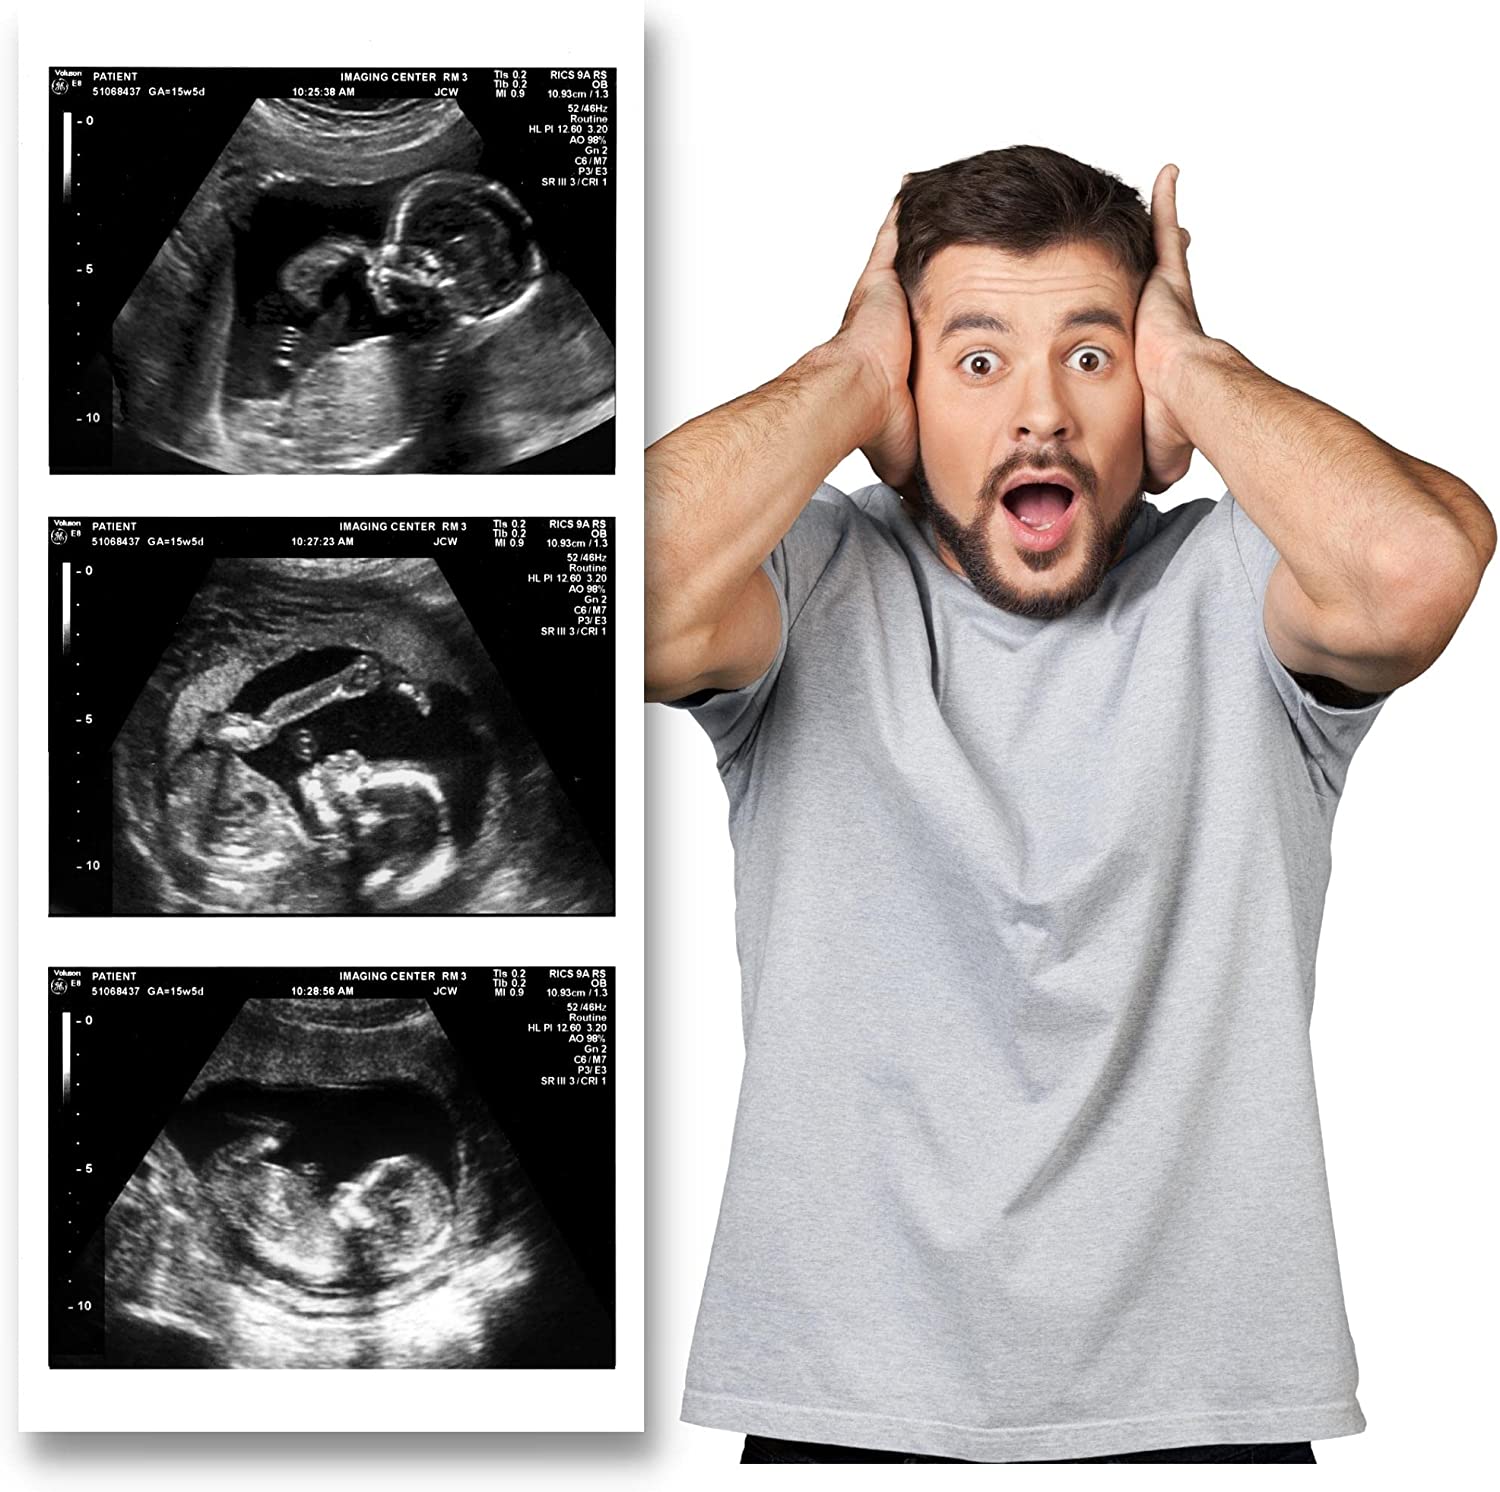 How to use a personalized fake sonogram to prank your friends and family? post thumbnail image